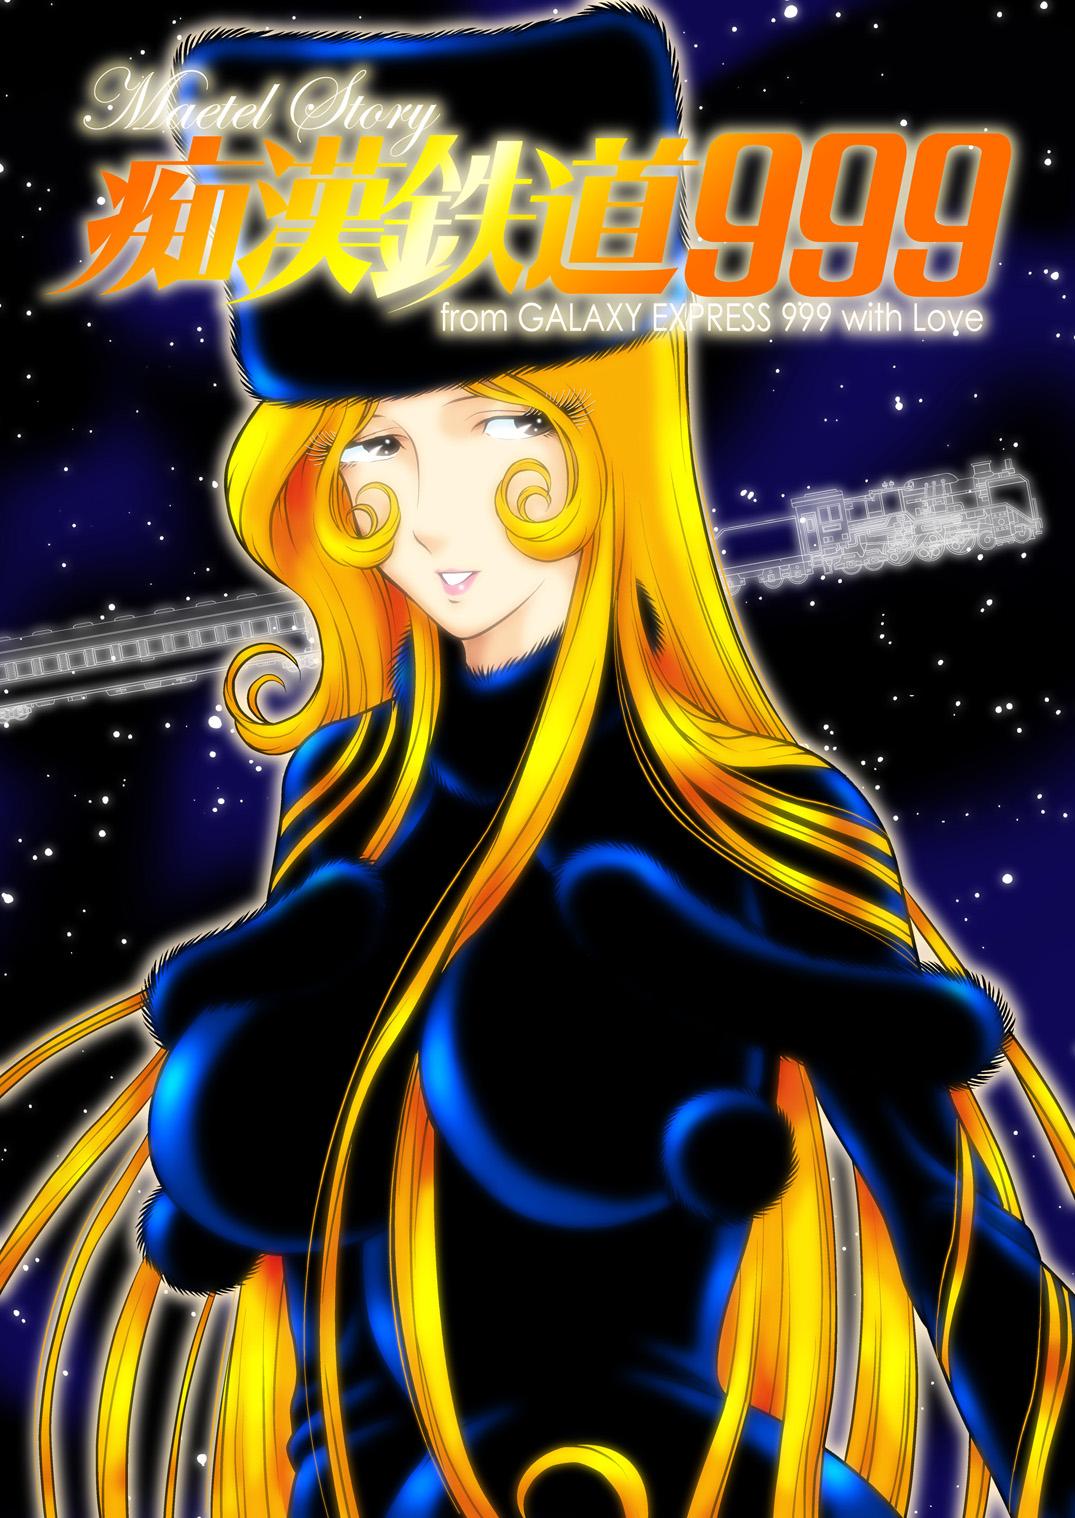 Anal Licking Chikan Tetsudou 999 - Galaxy express 999 Doctor - Picture 1